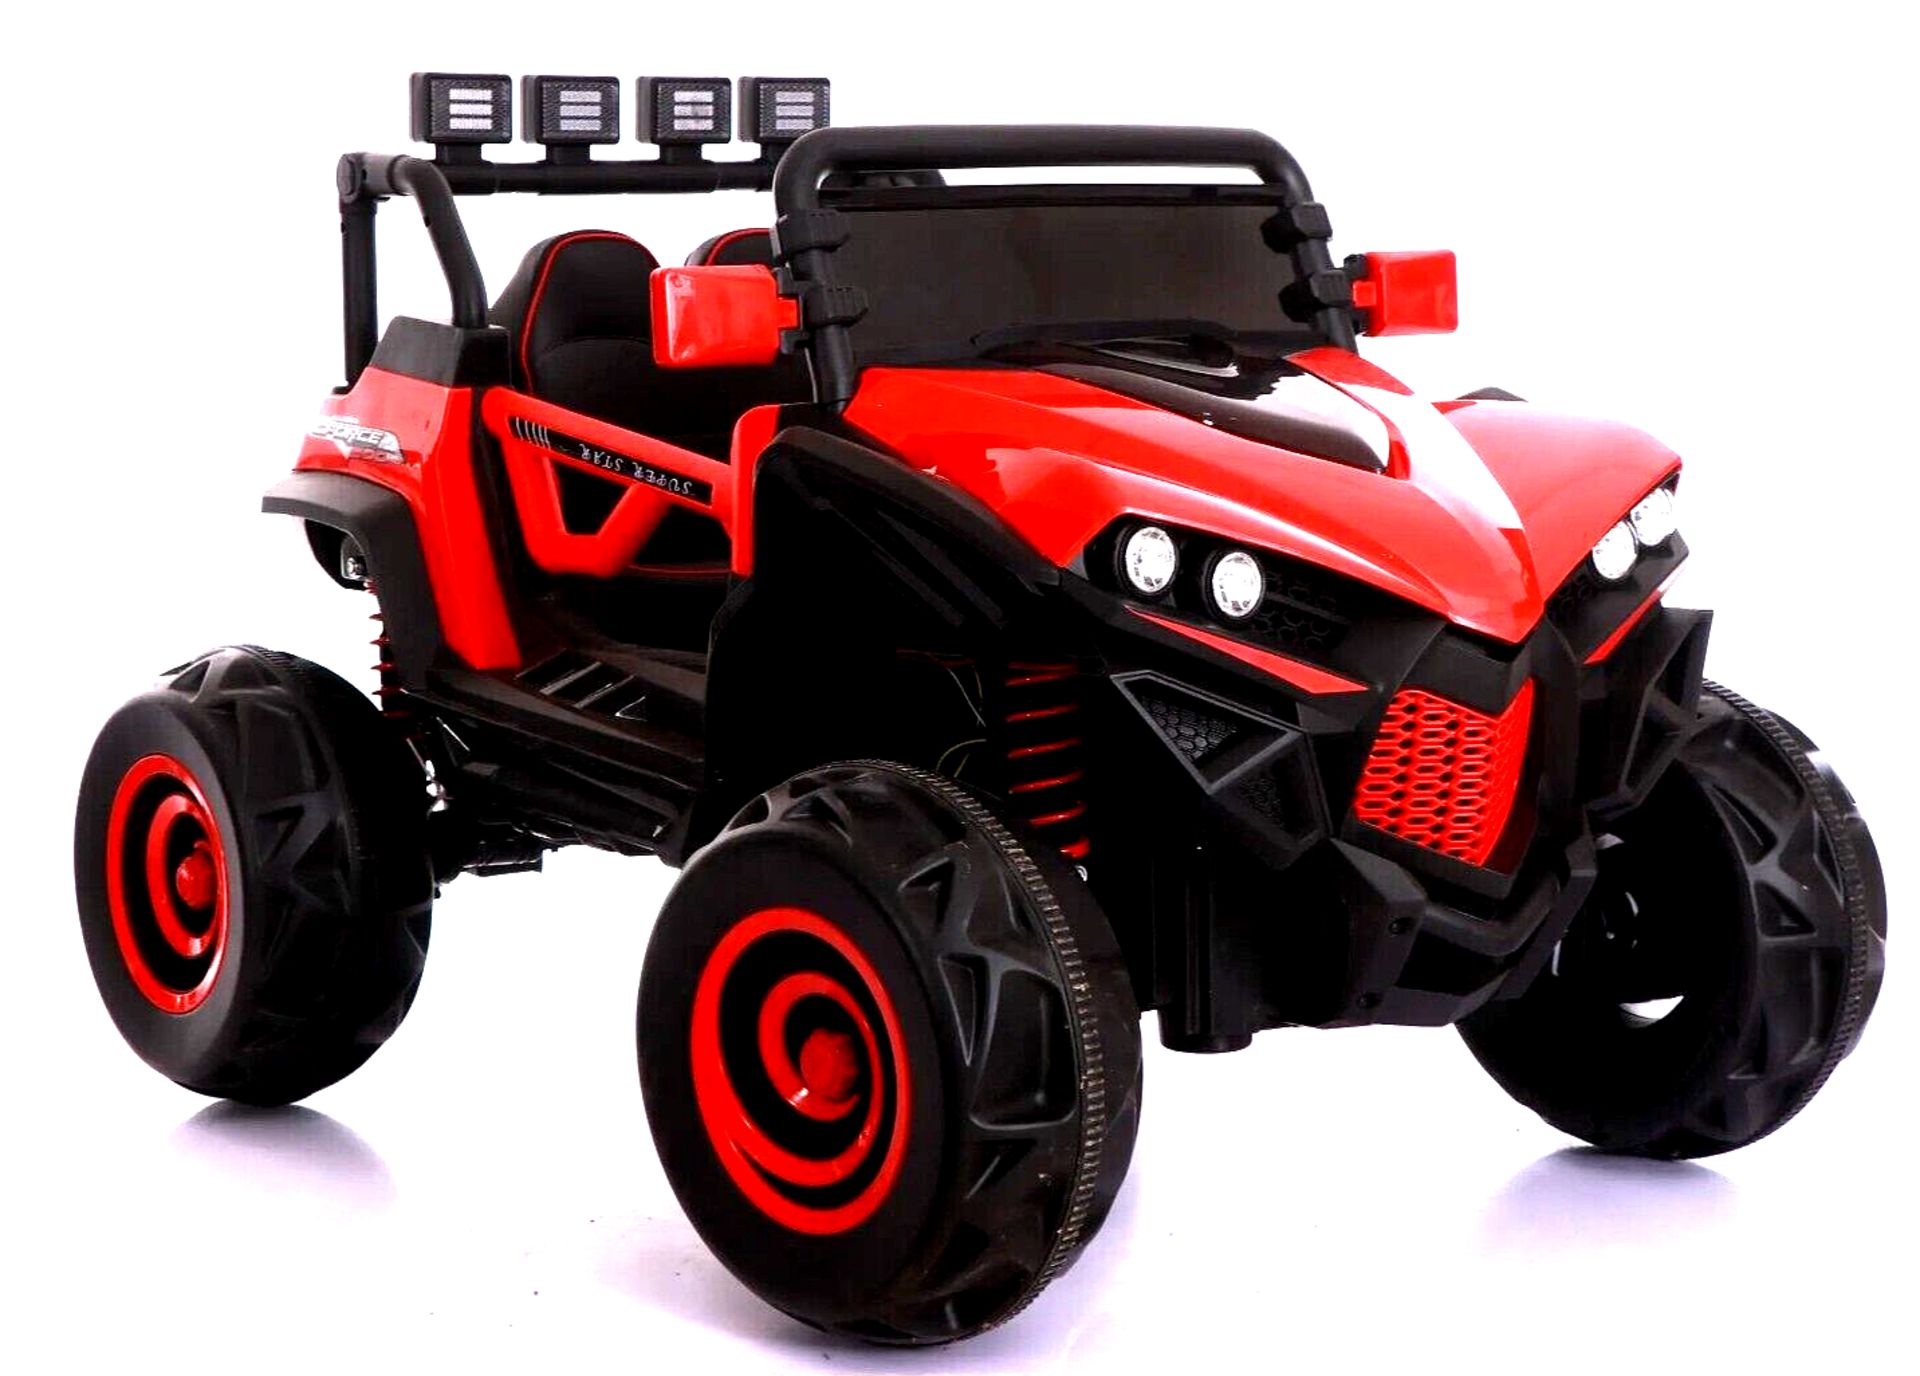 RED 4X4 ATV/UTV KIDS BUGGY JEEP ELECTRIC CAR WITH REMOTE BRAND NEW BOXED - Image 2 of 6